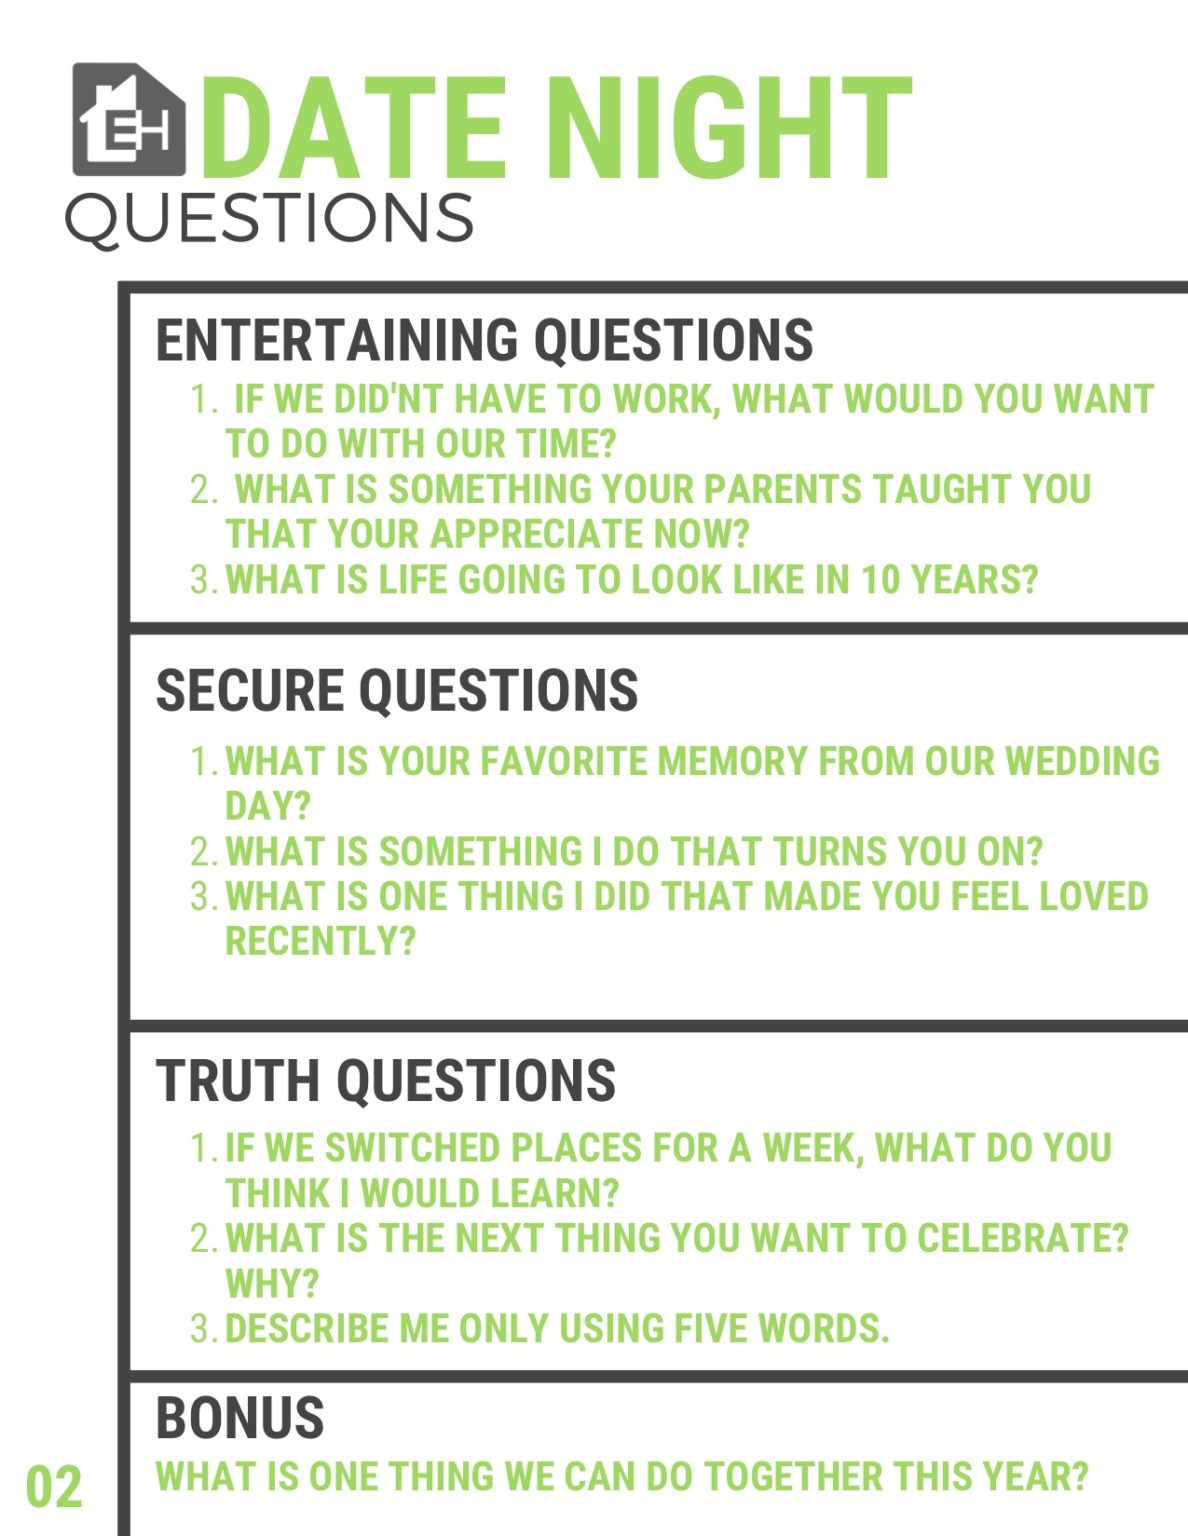 Date Night Questions 02 - Empowered Homes